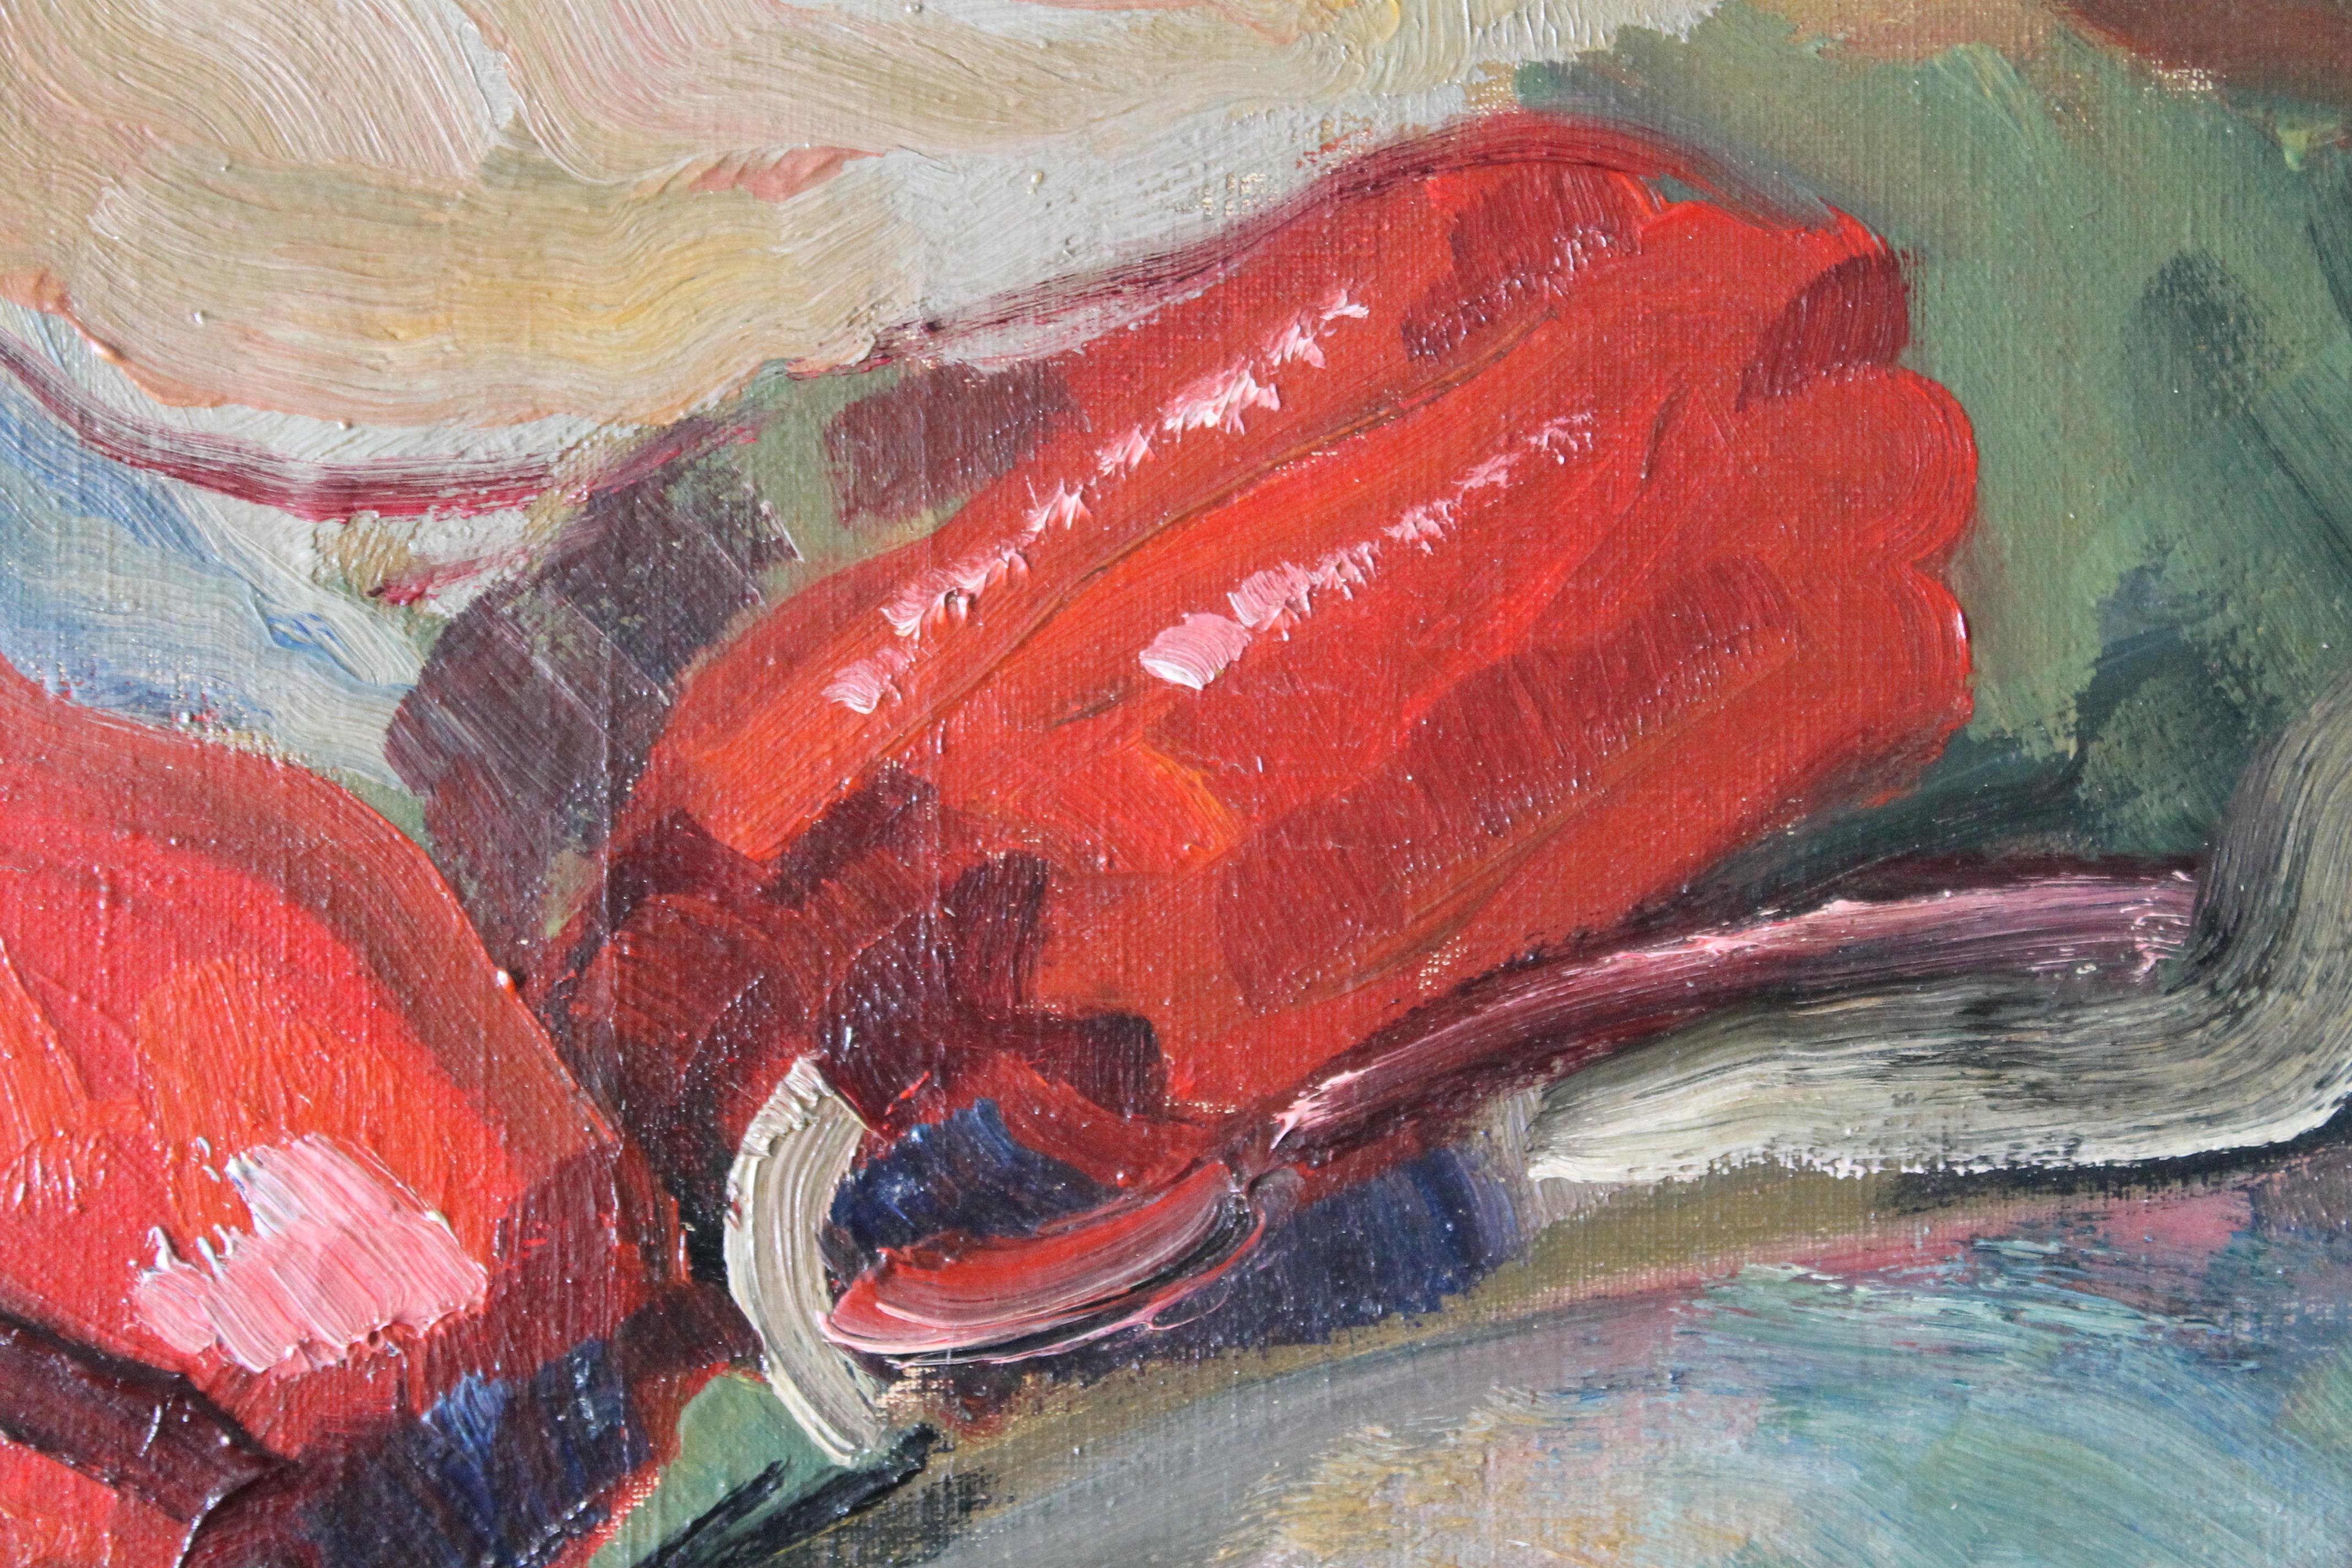 Fish Still Life Oil painting, Impressionist fish, sea bream and red peppers 5